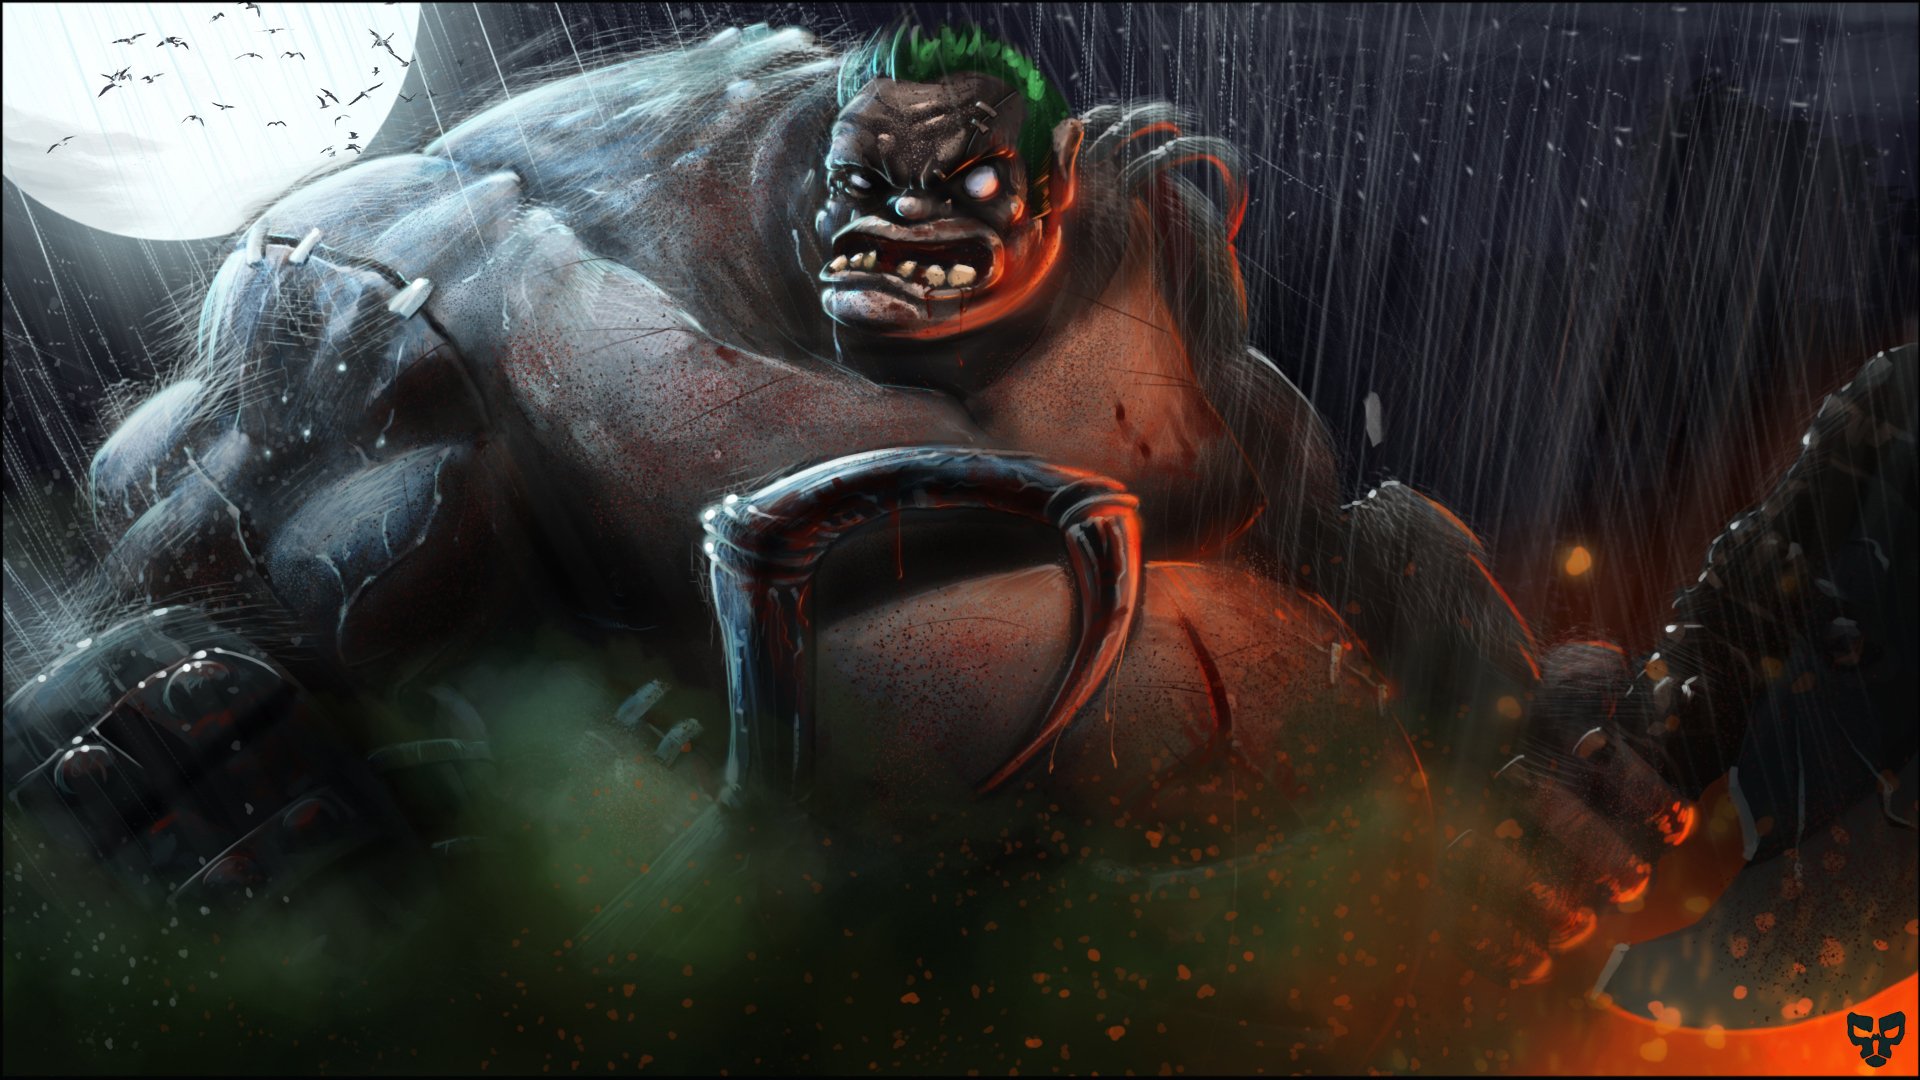 14 Pudge Dota 2 Hd Wallpapers Background Images Wallpaper Abyss Images, Photos, Reviews